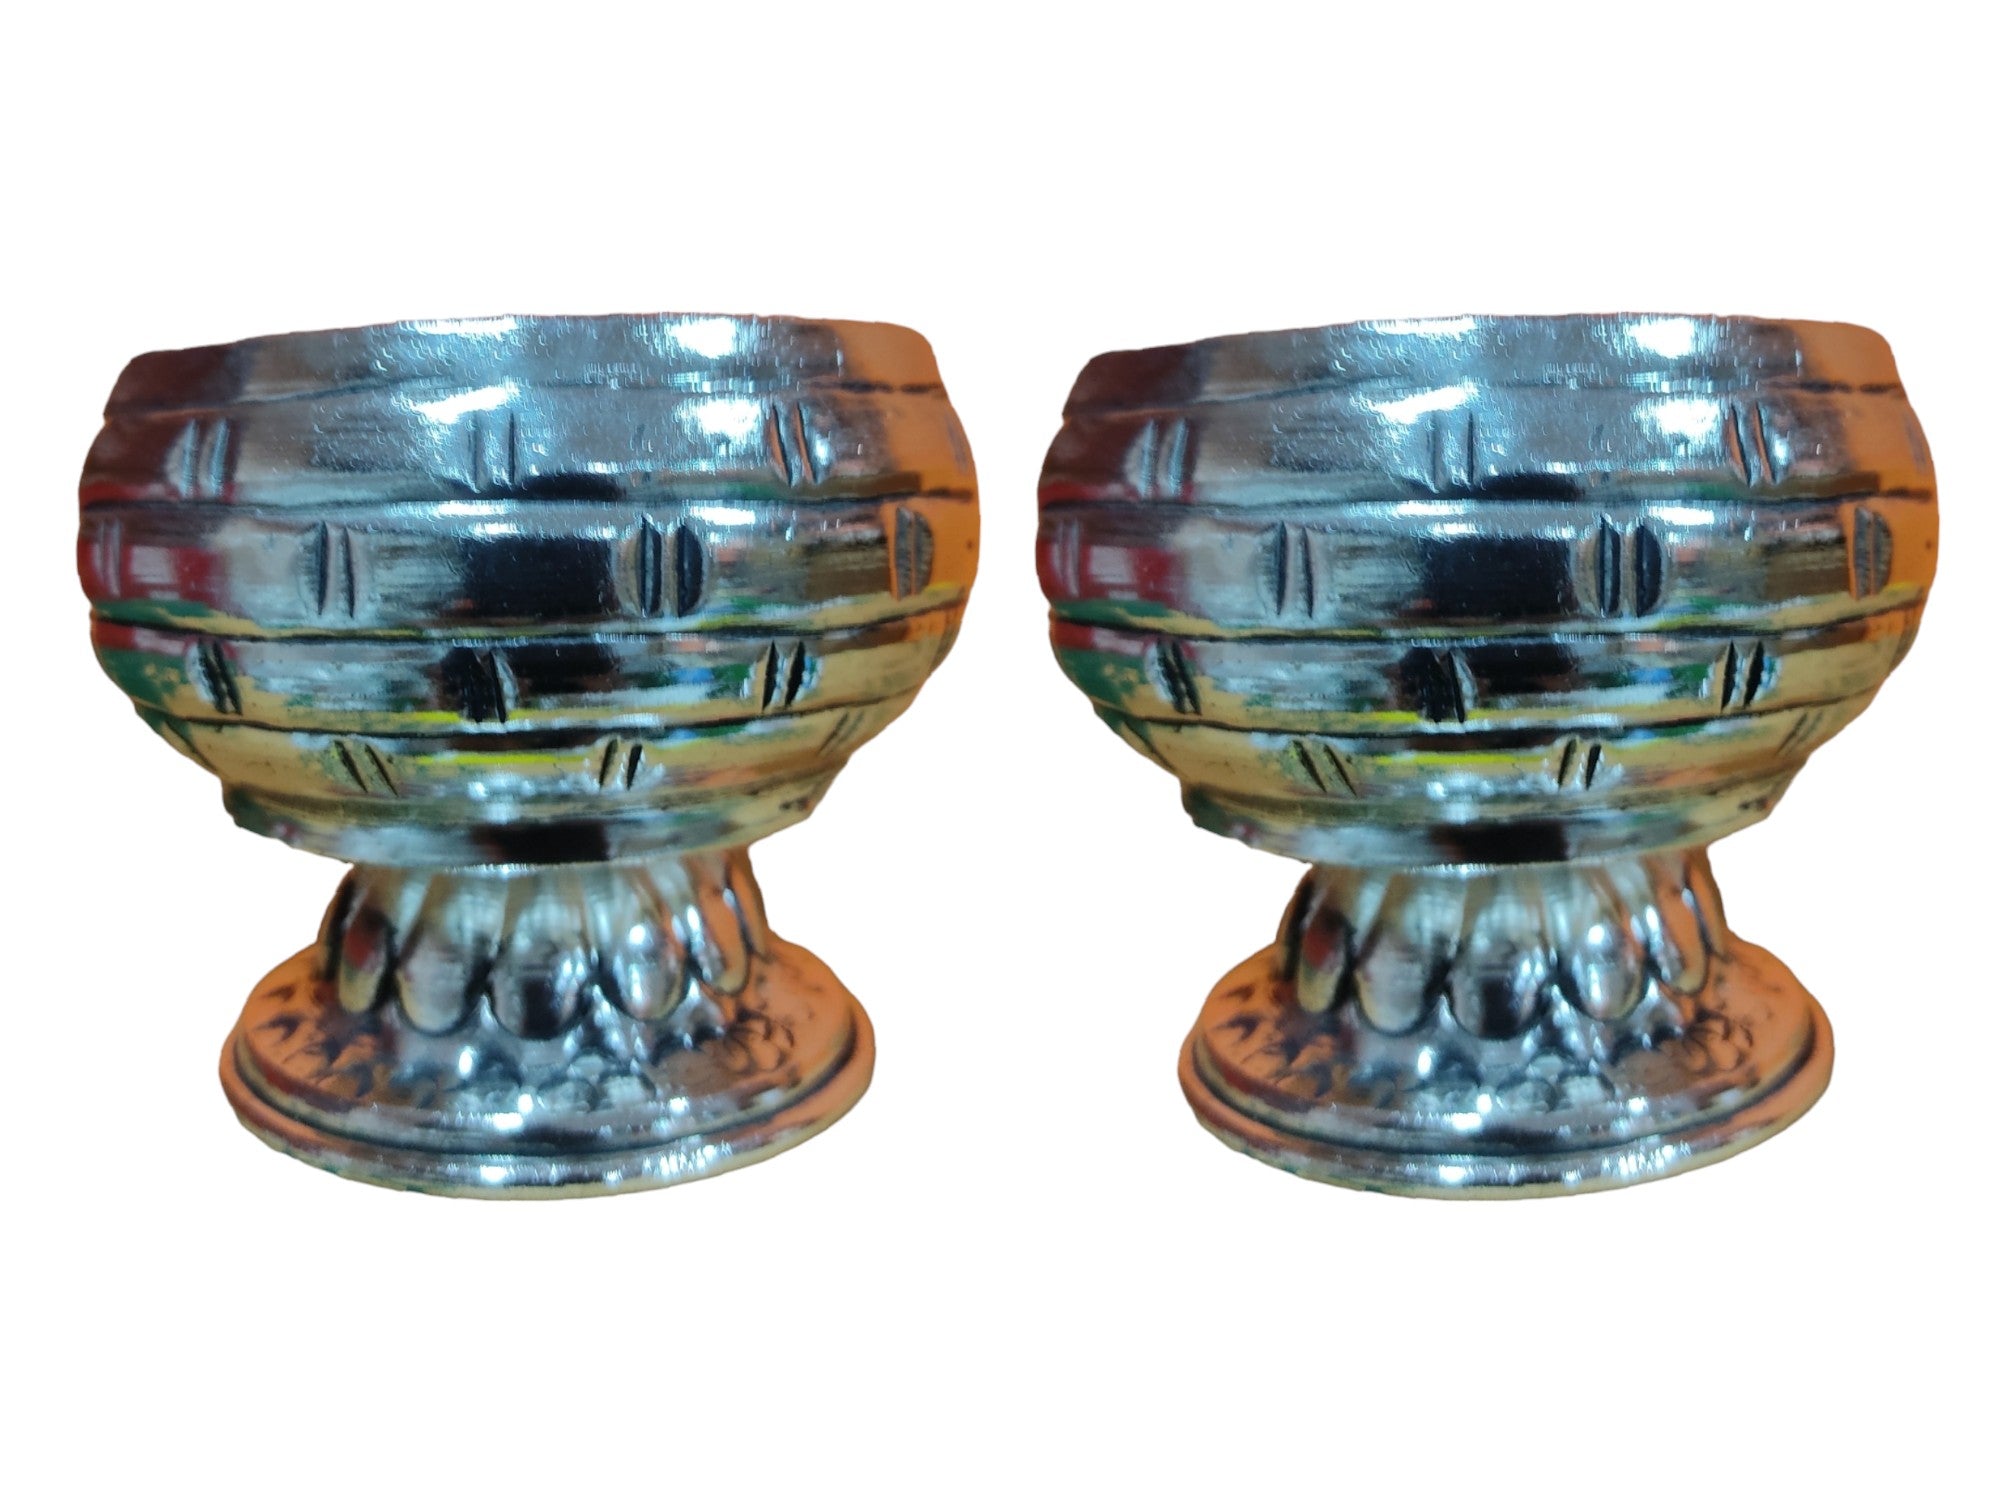 Sigaram Antique German Silver Kum Kum Cup With Lay For Home Pooja Decor K4391